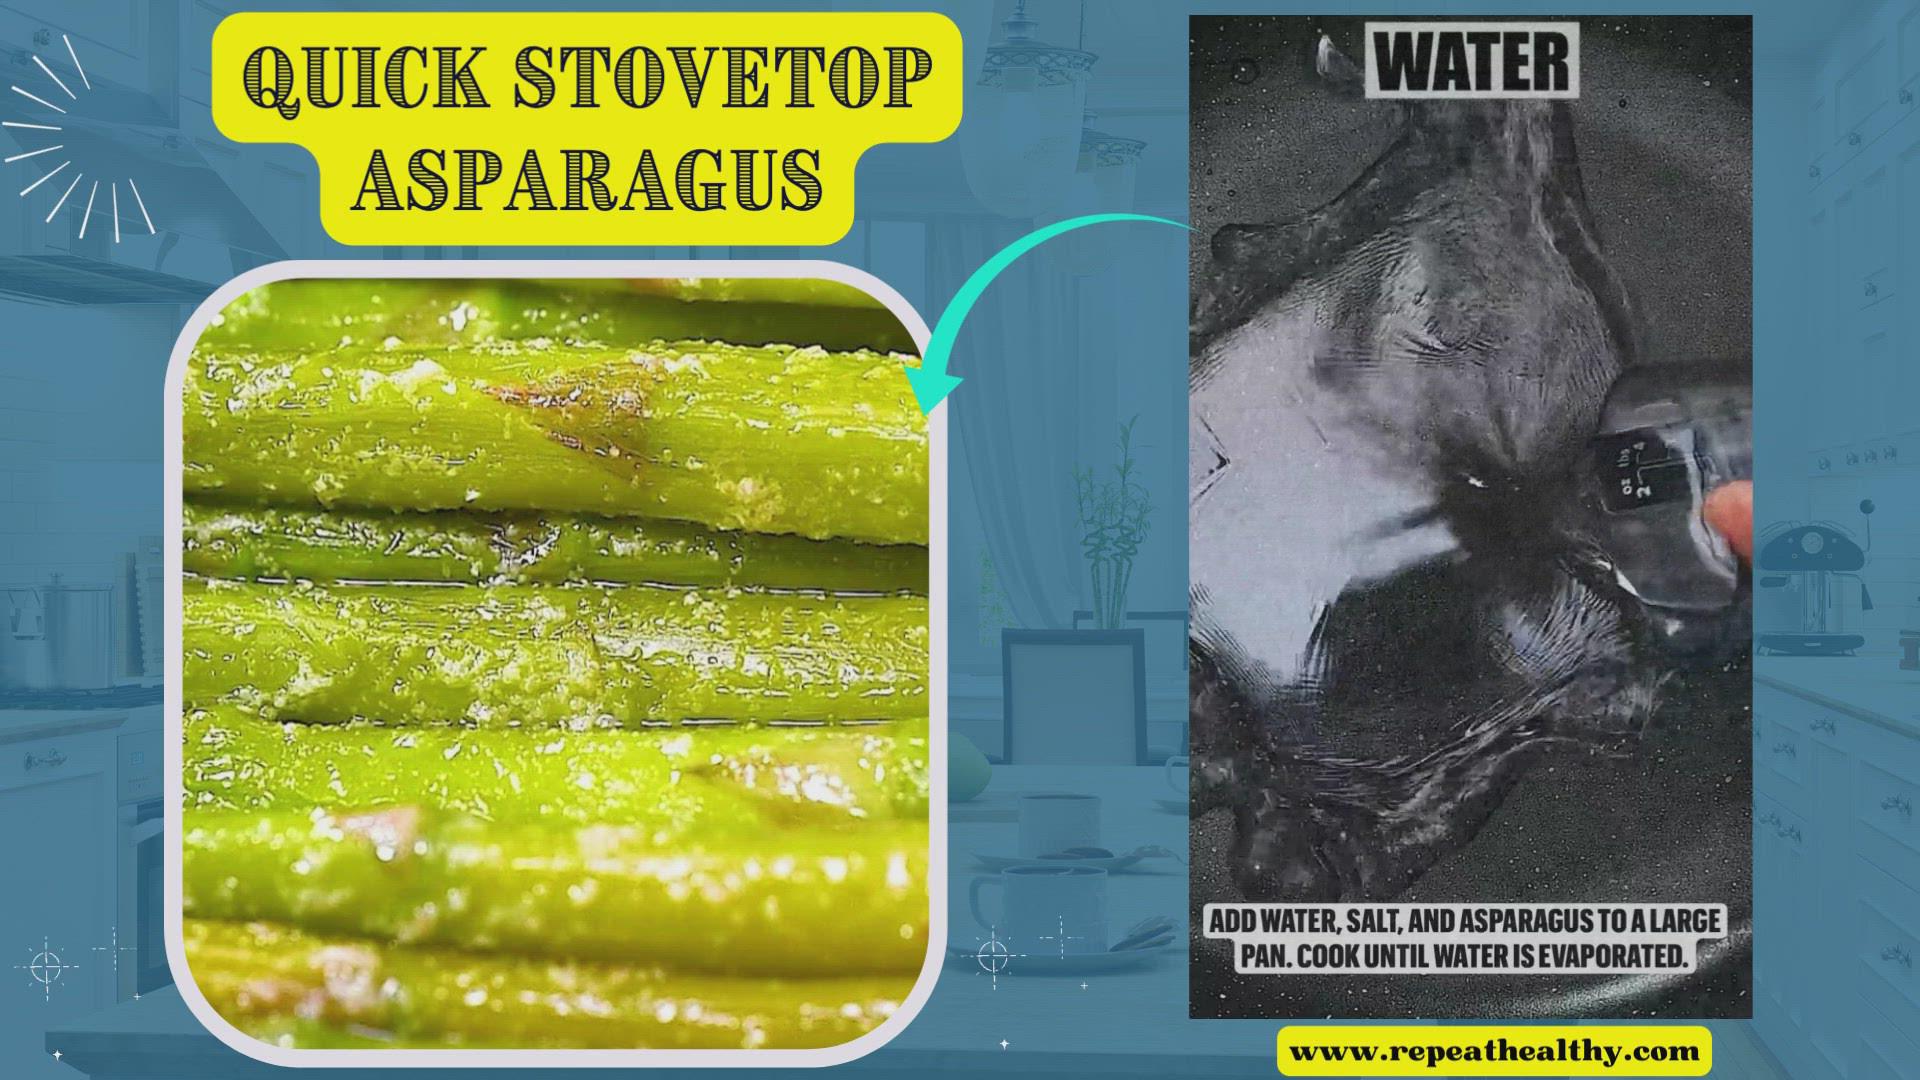 'Video thumbnail for Quick Stovetop Asparagus'